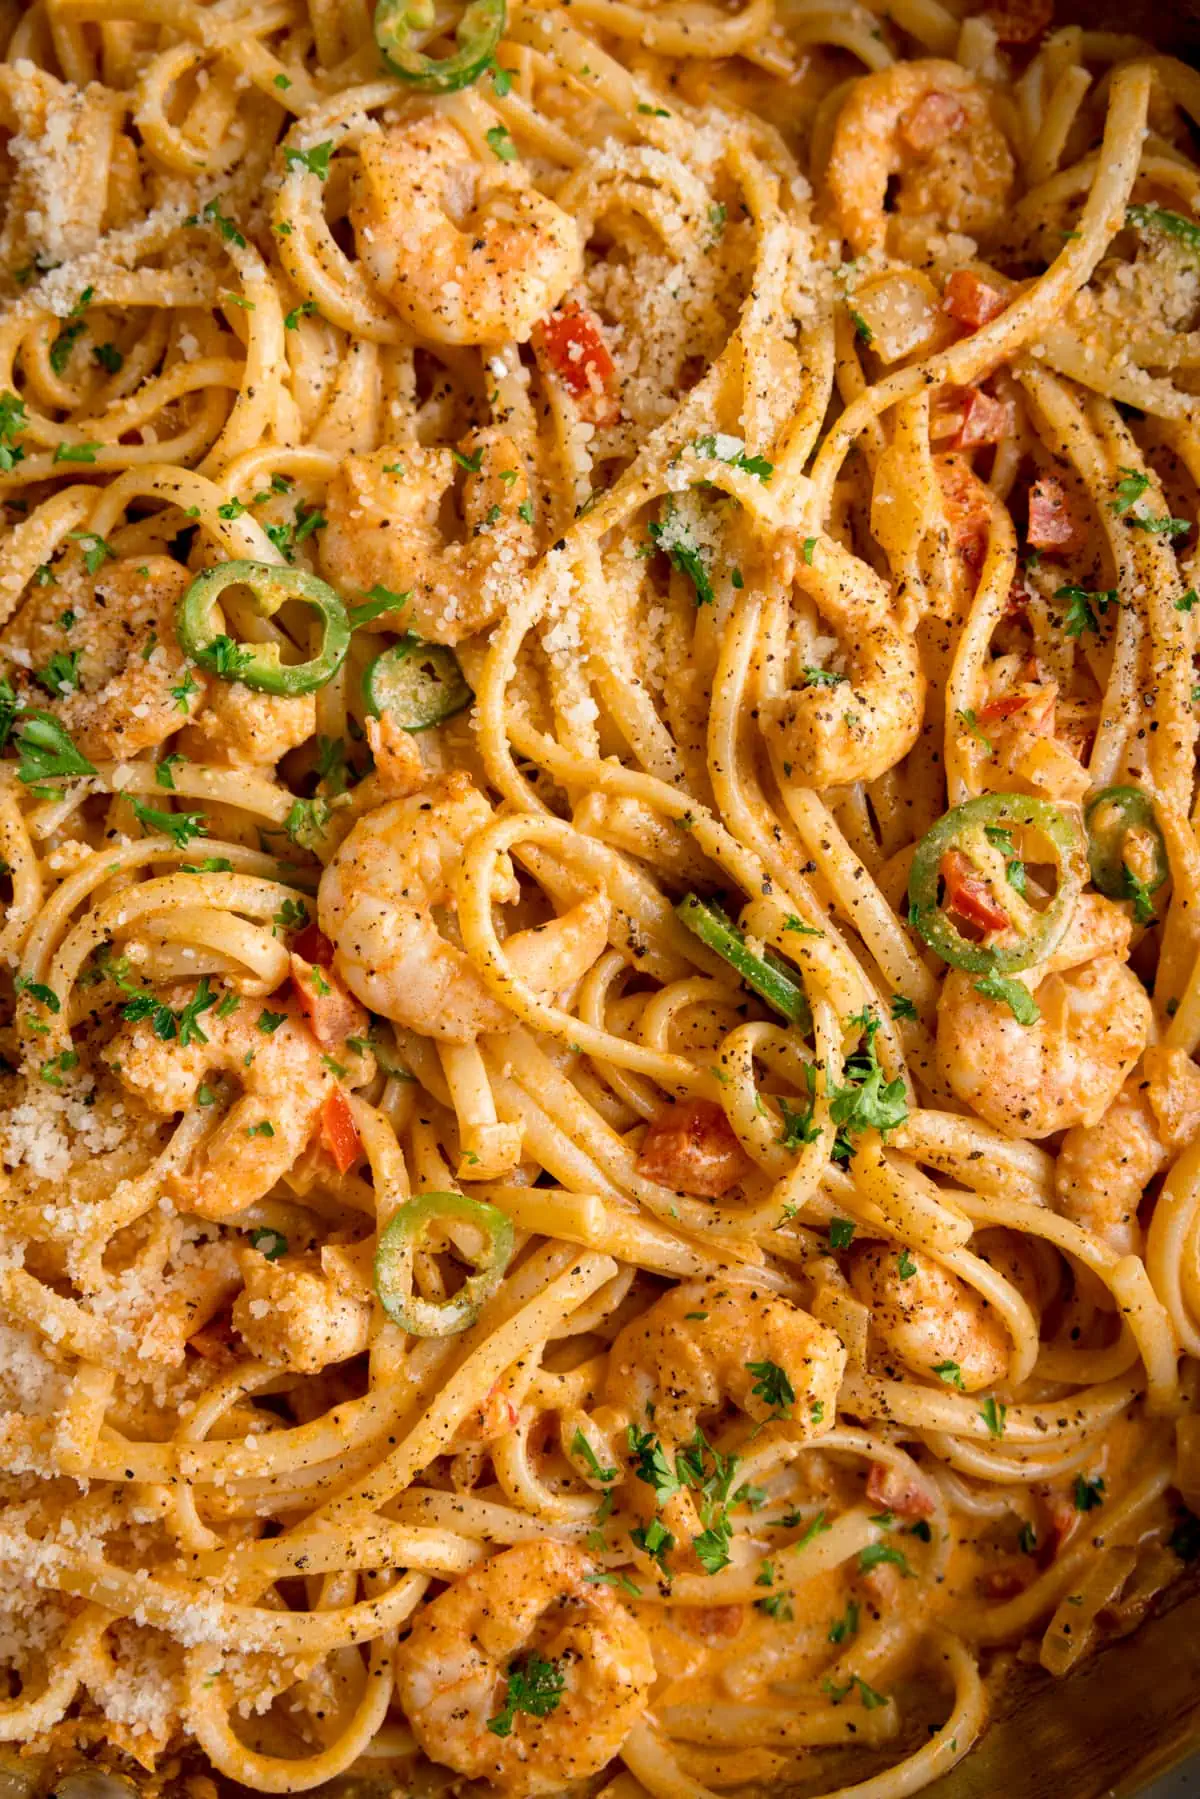 Extreme close up prawn linguine in a creamy buffalo sauce.